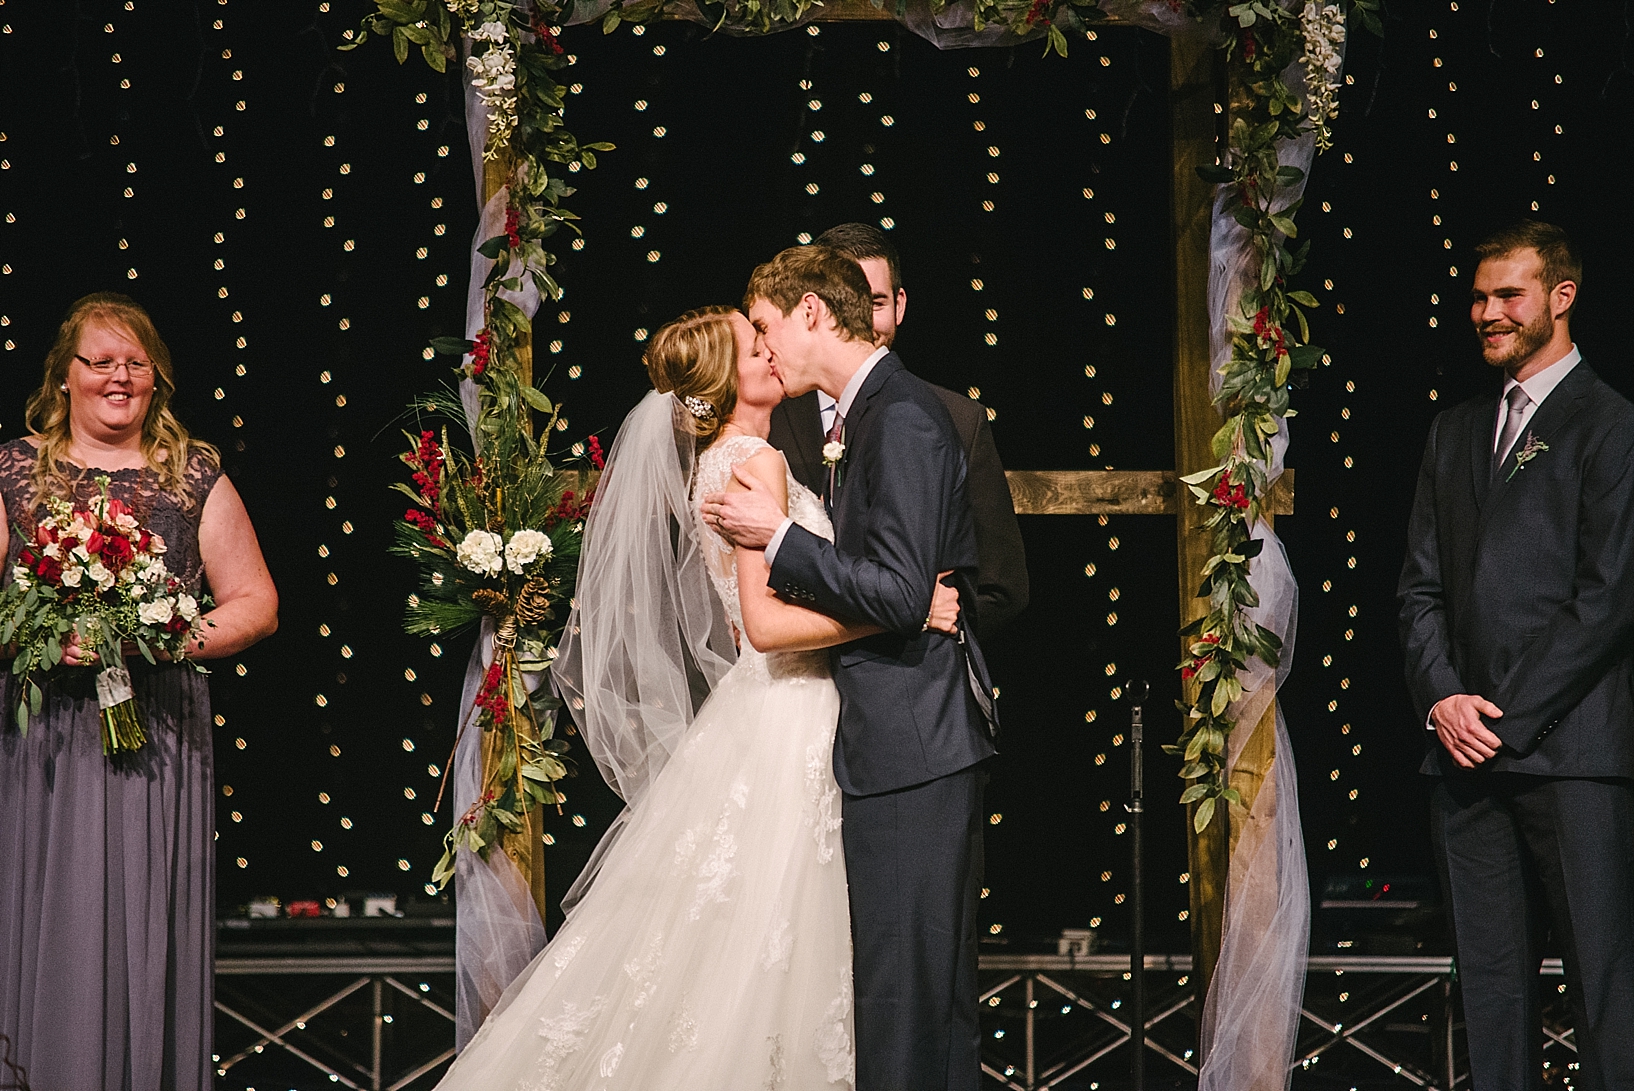 bride and groom share first kiss during wedding ceremony on church stage